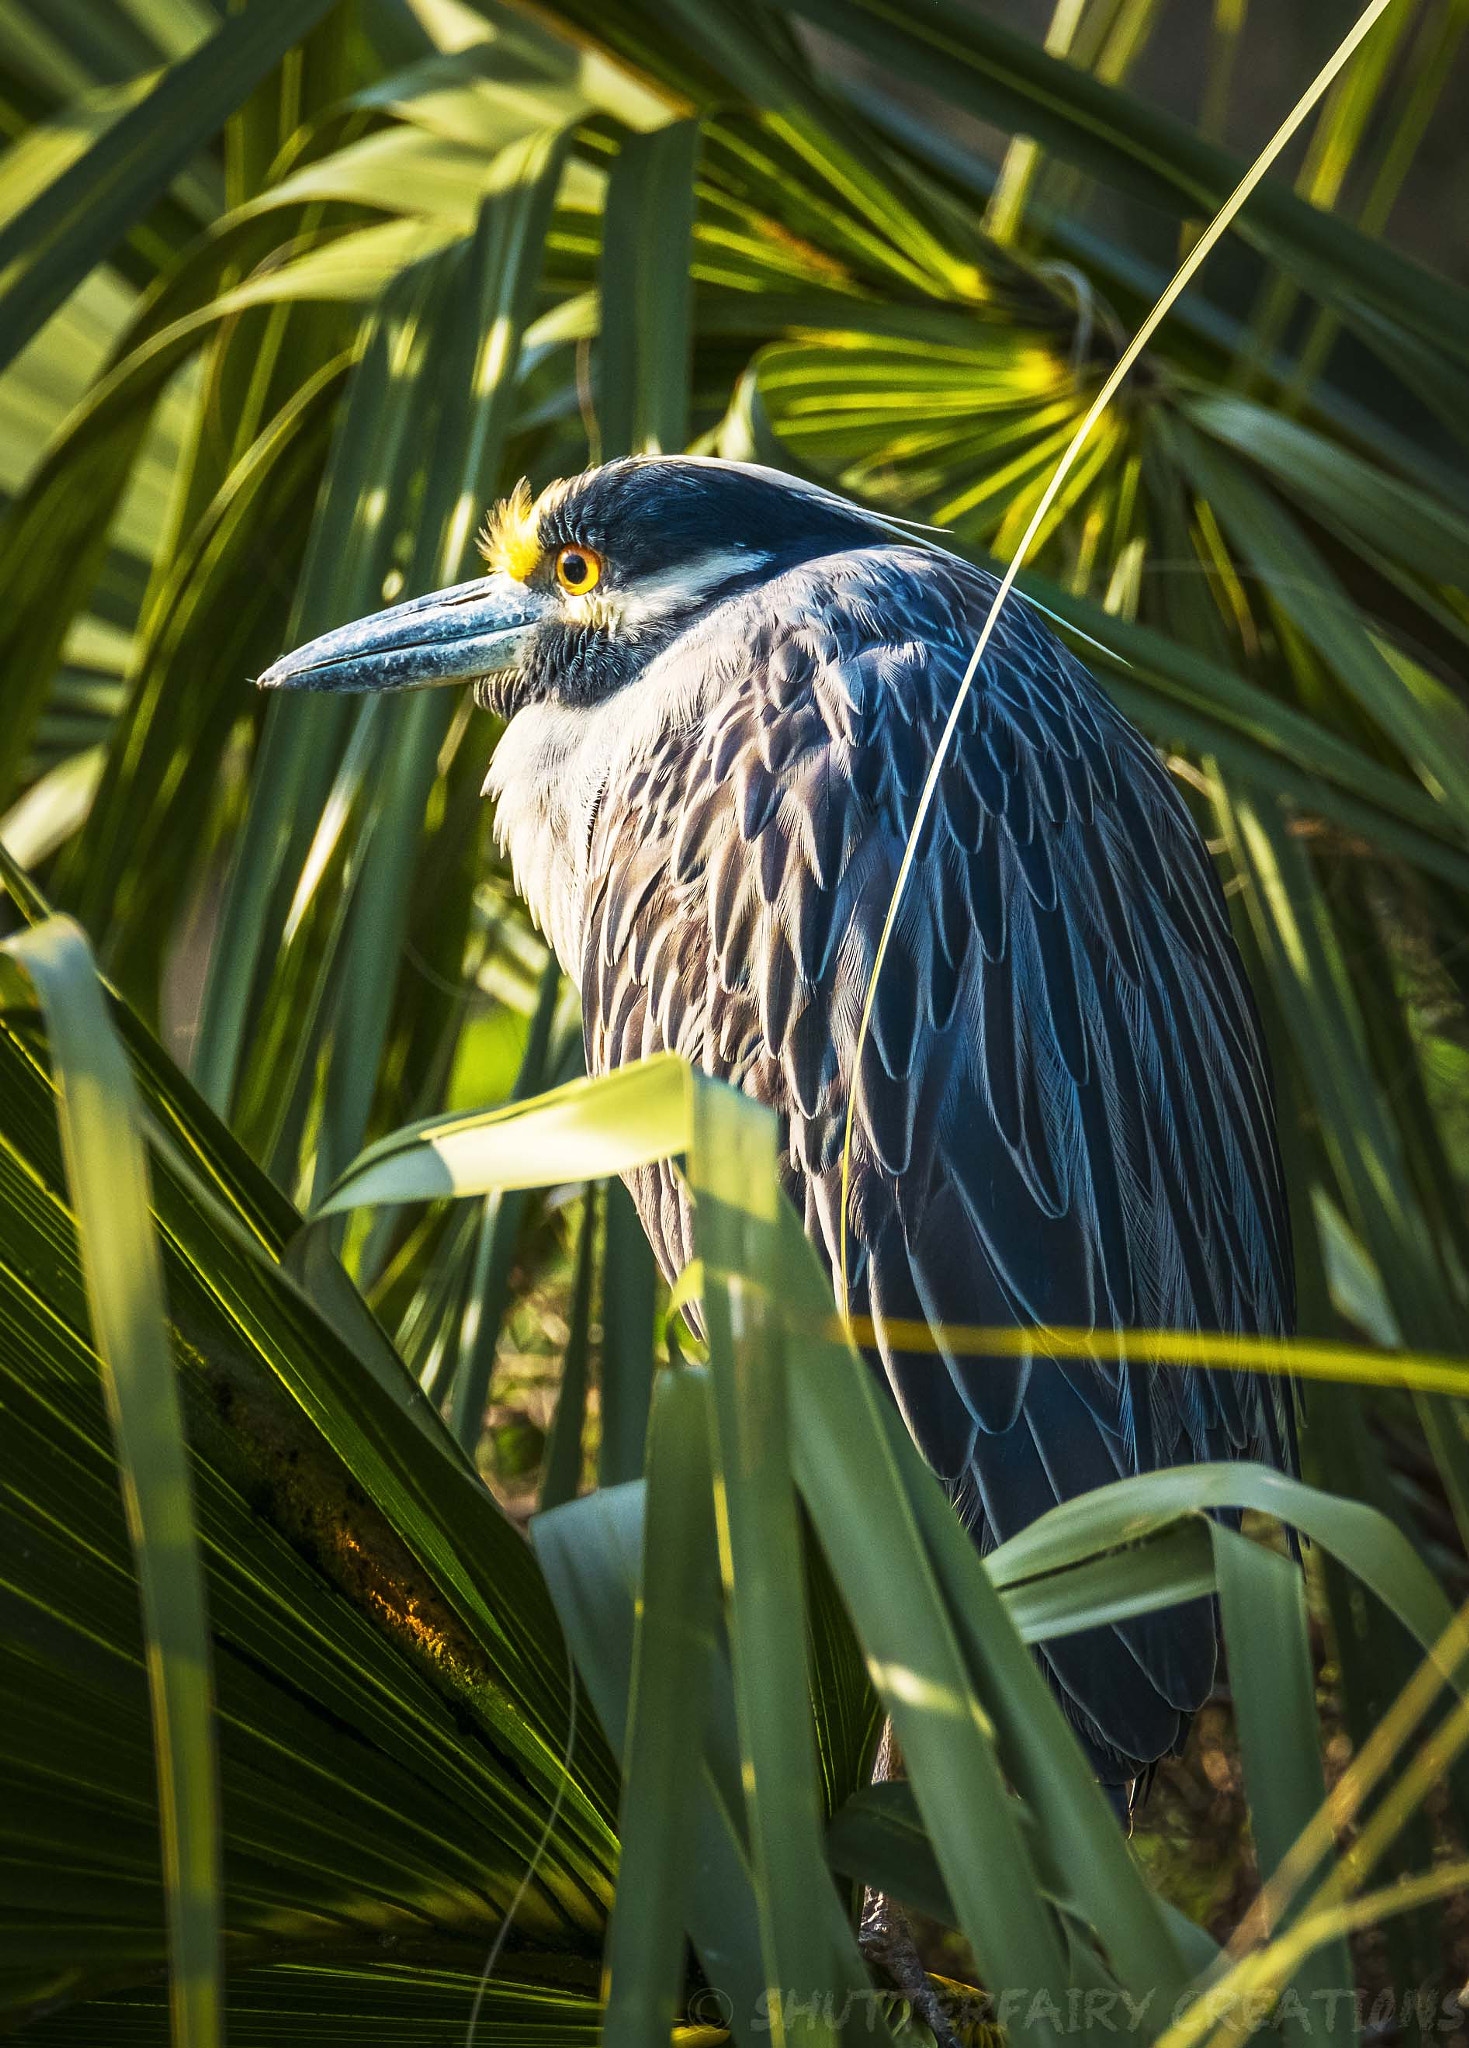 Fujifilm X-T2 sample photo. Yellow capped night heron in st. augustine photography